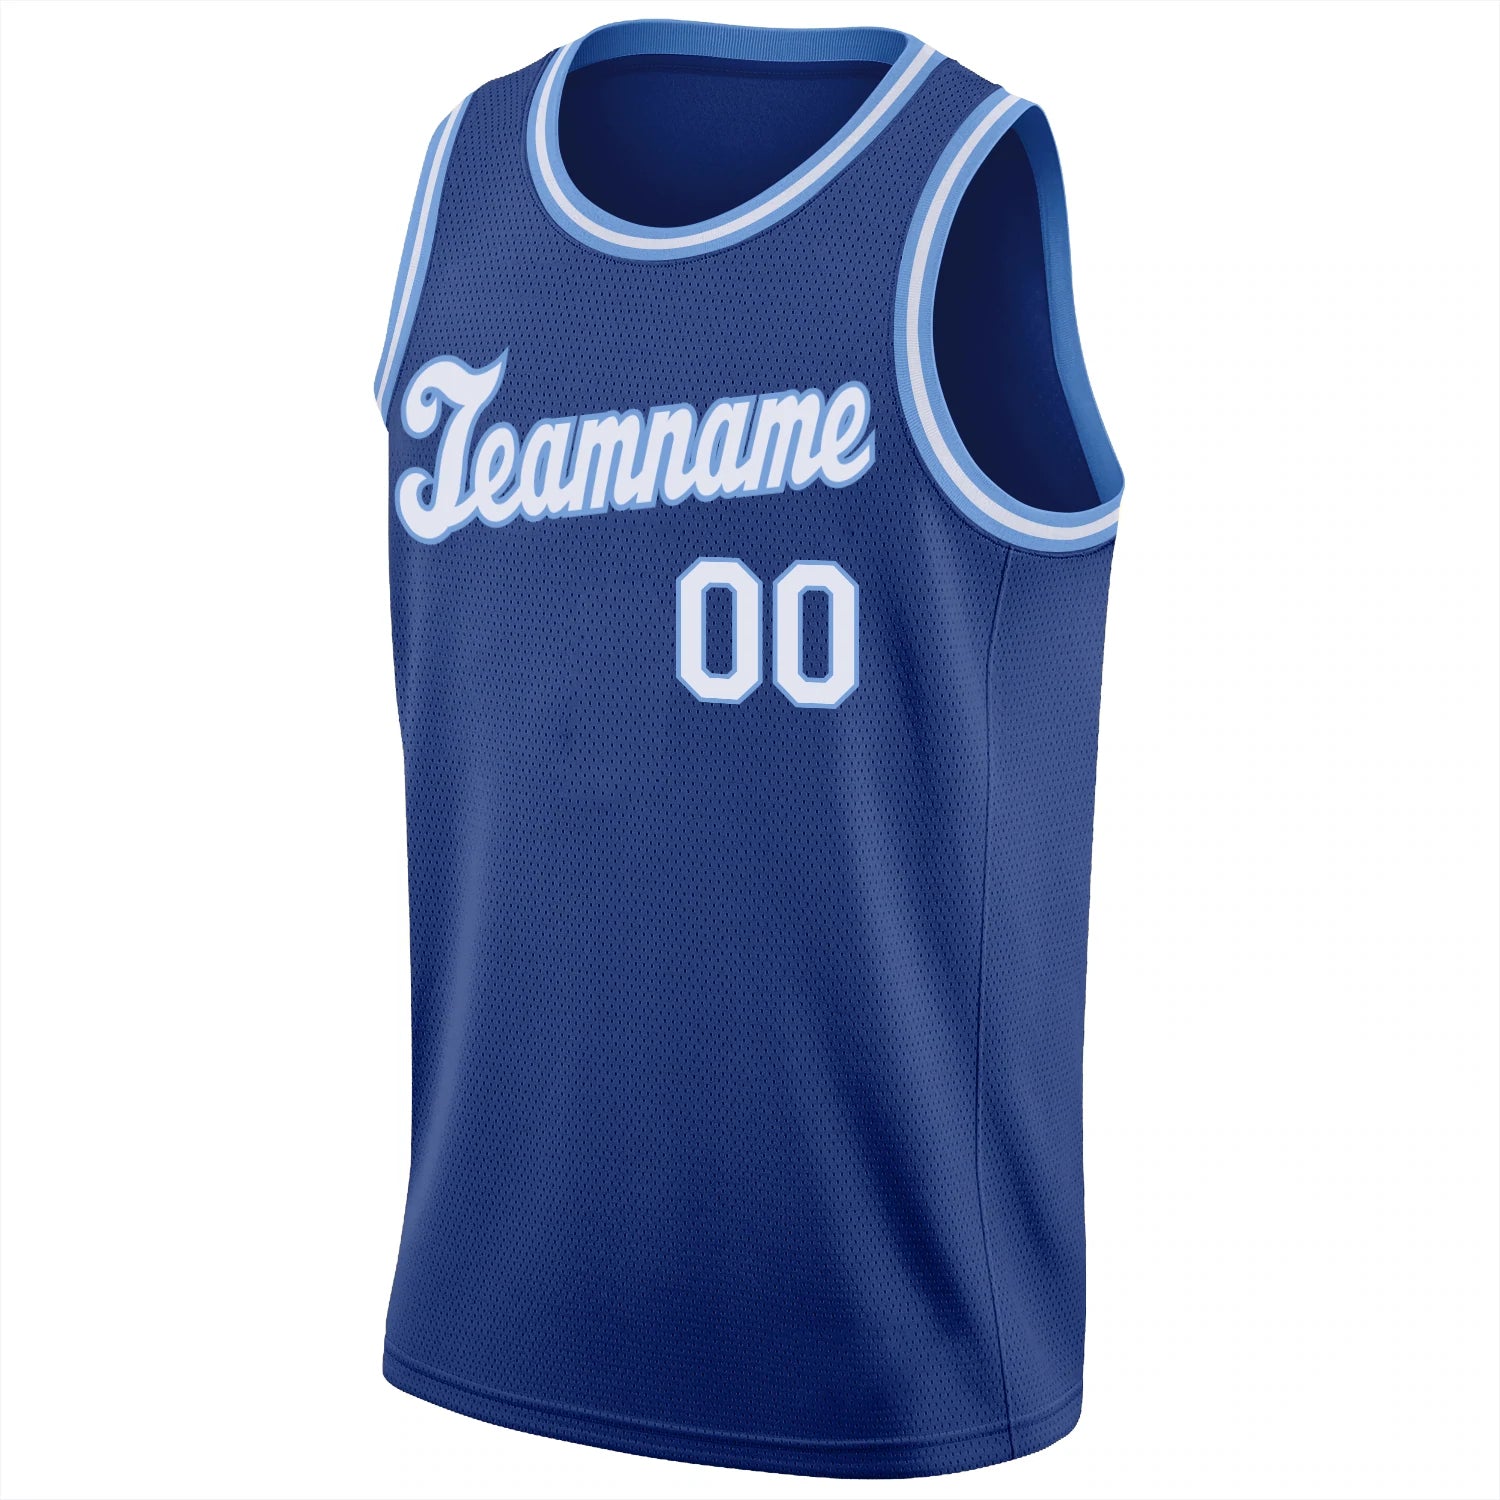 Custom Men Printed Sports Apparel Round Neck Teamwear Basketball Jersey Embroidery Customized Personalised Team t-shirts Logo Name and Numbers